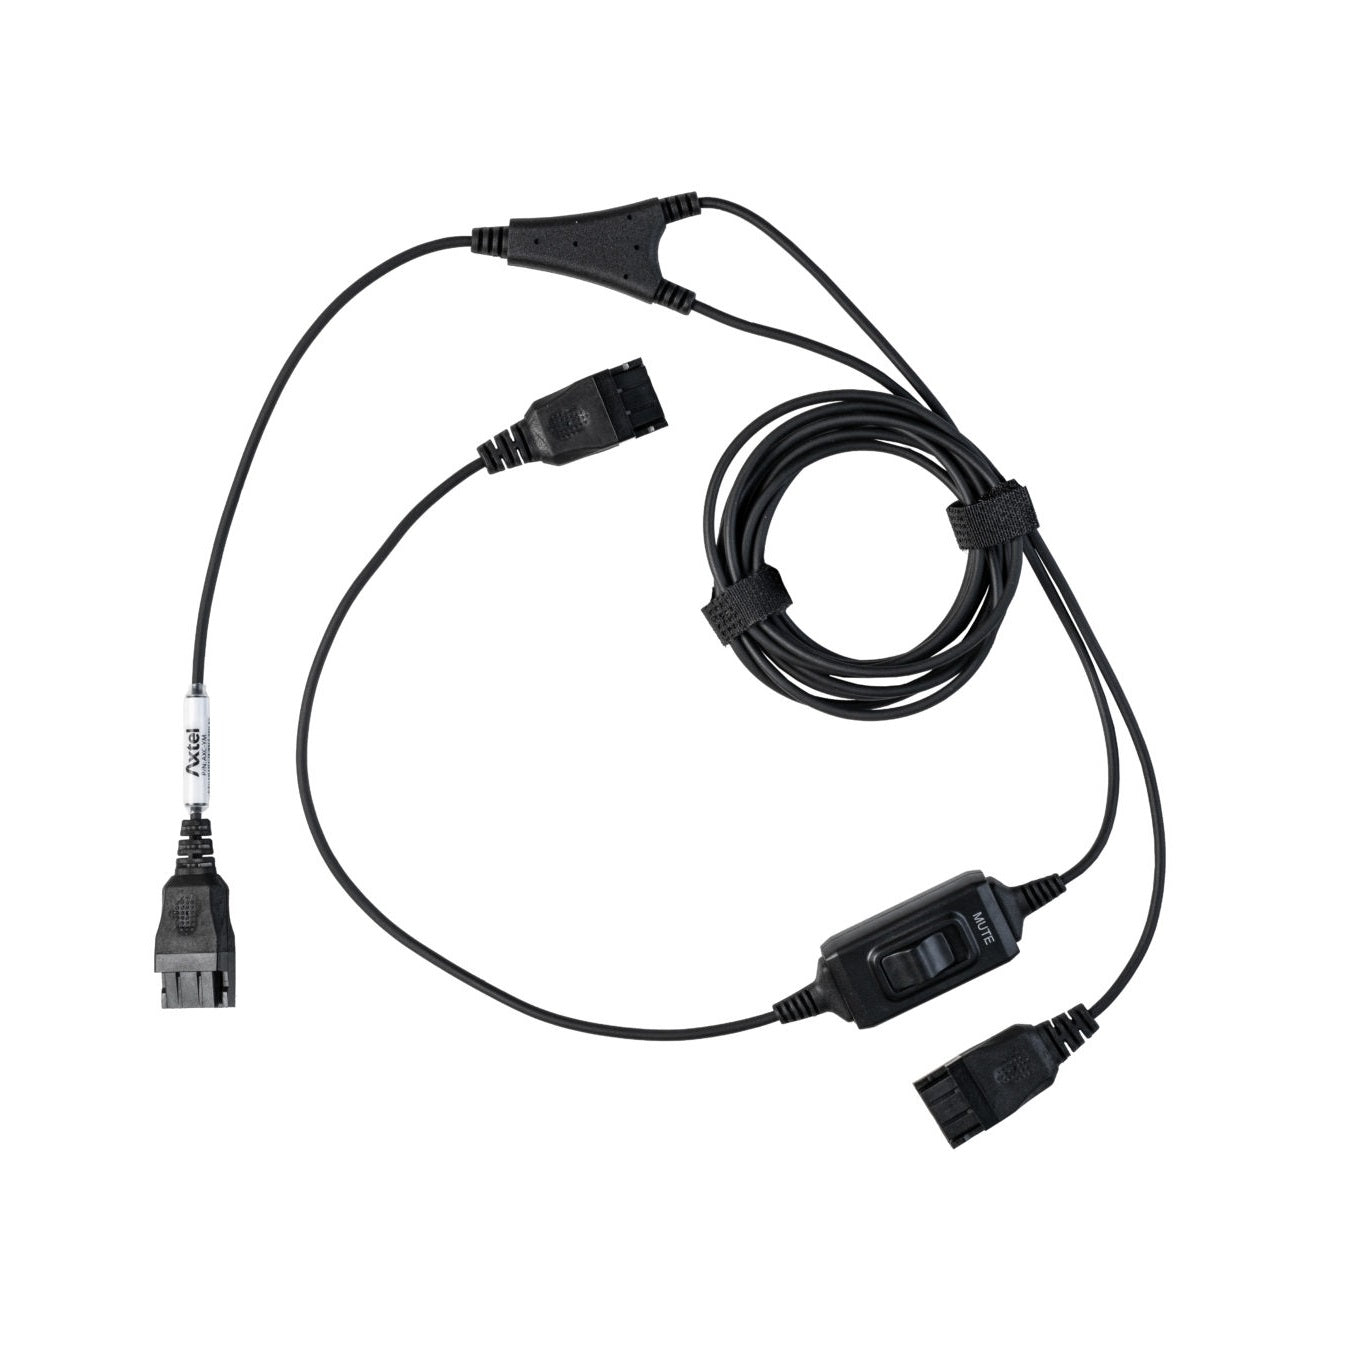 axtel-axc-ym-interface-cable-FRONT